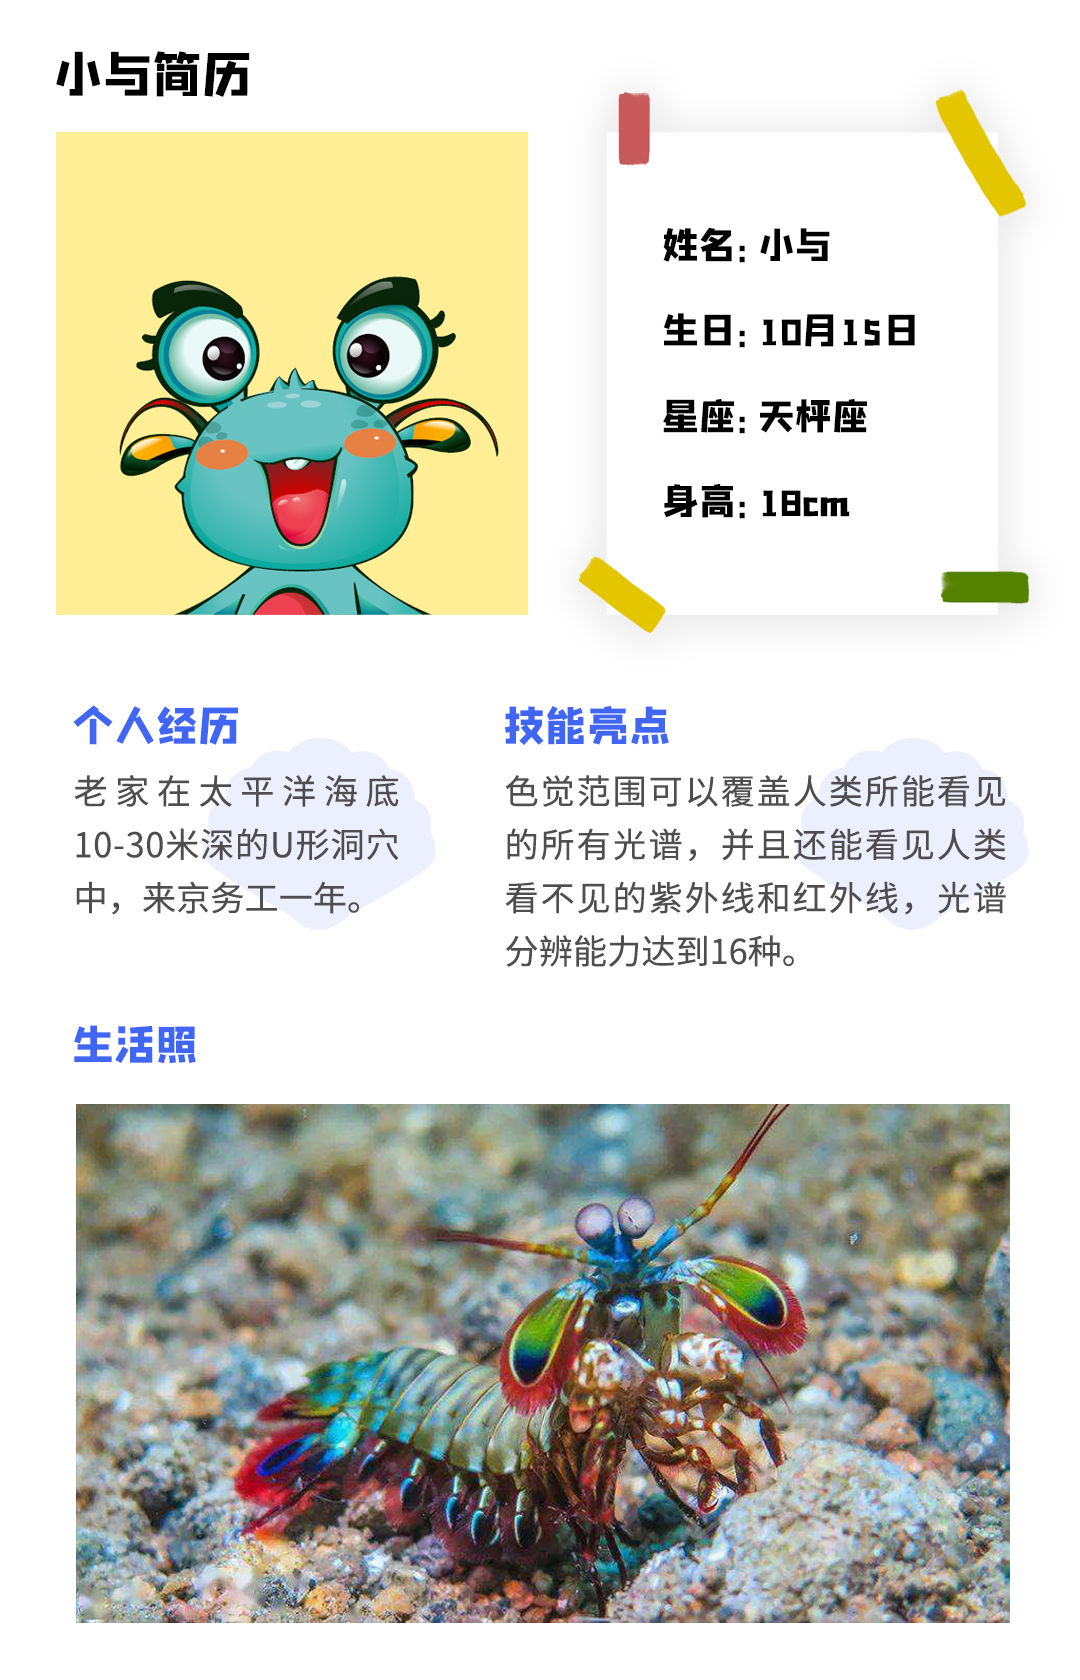 Official Announcement: SEETRUM Mascot "Xiao Yu" Has Made its Debut!(图2)